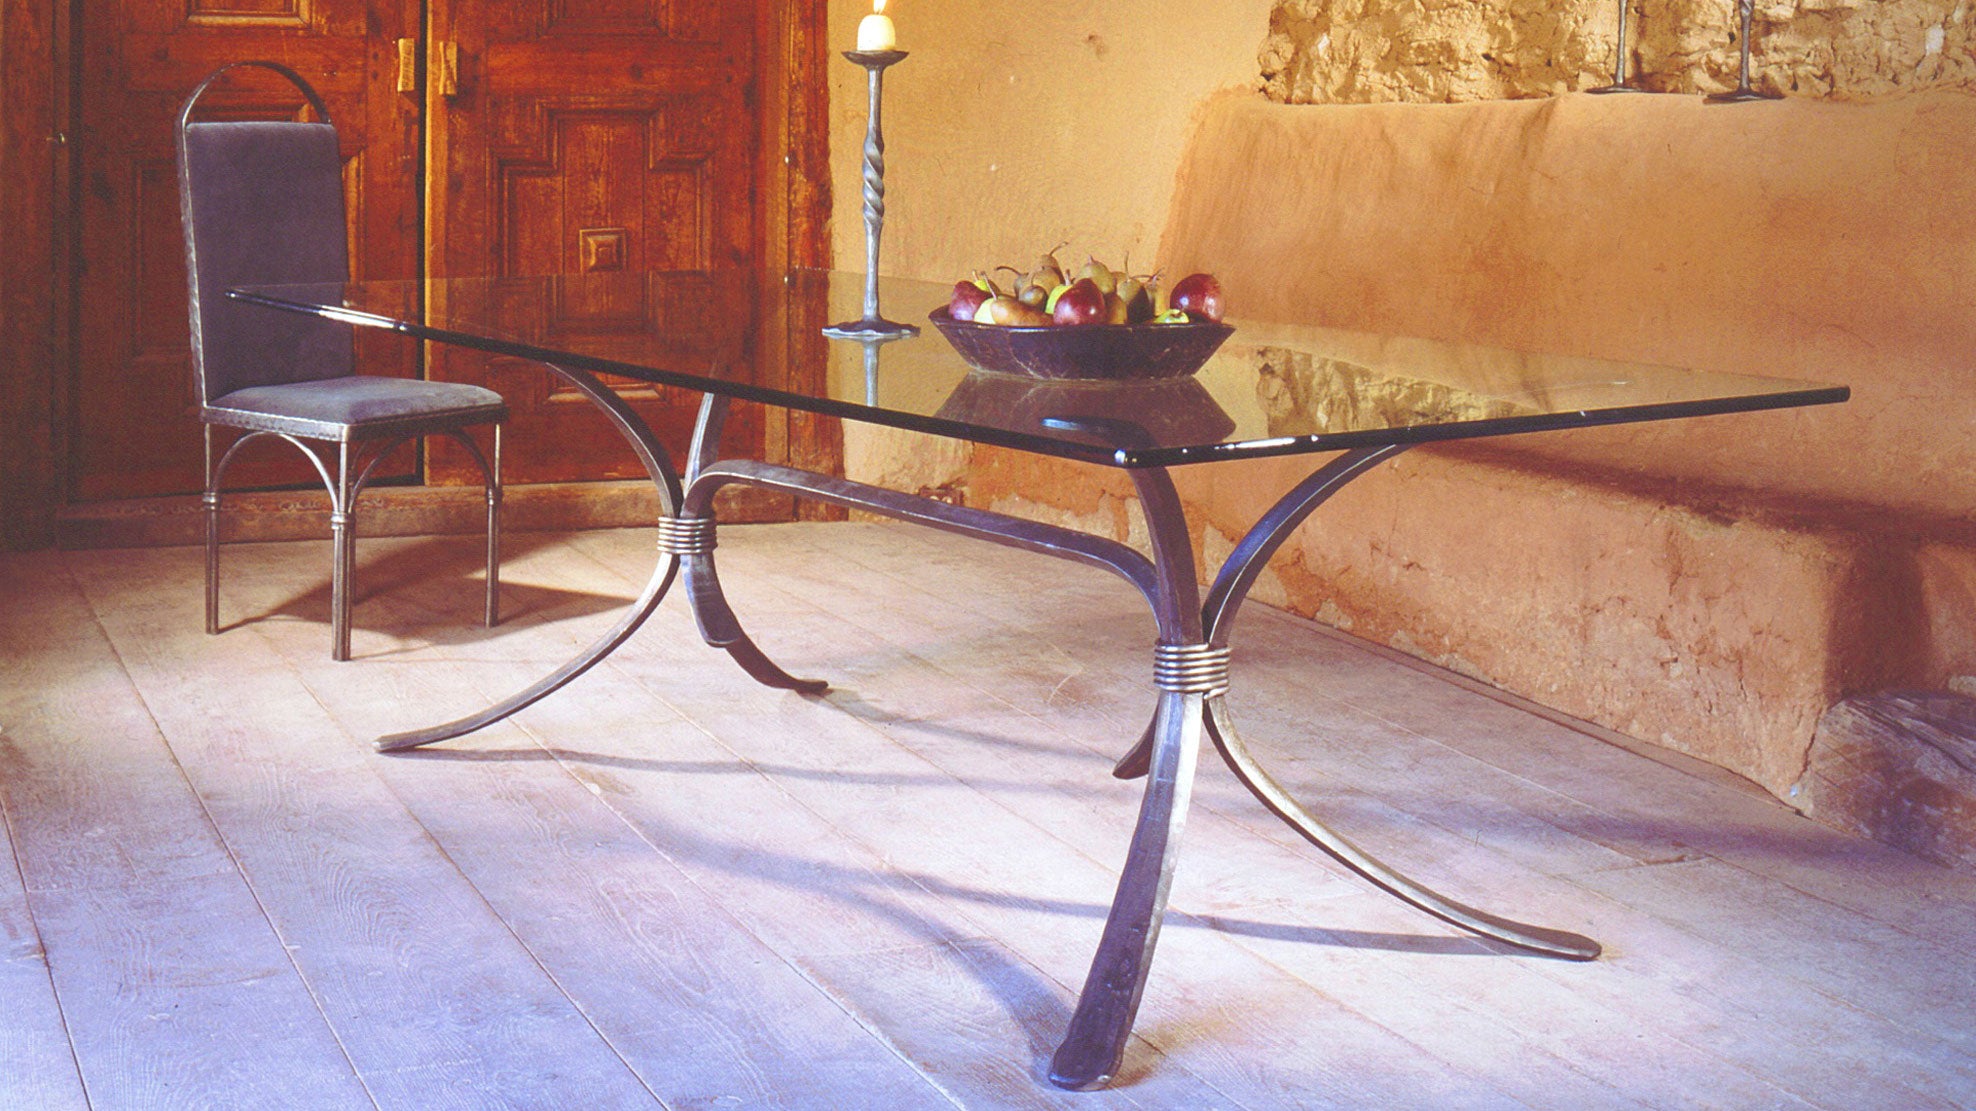 Hand forged ironworks dining furniture by New Mexico blacksmith, Christopher Thomson.